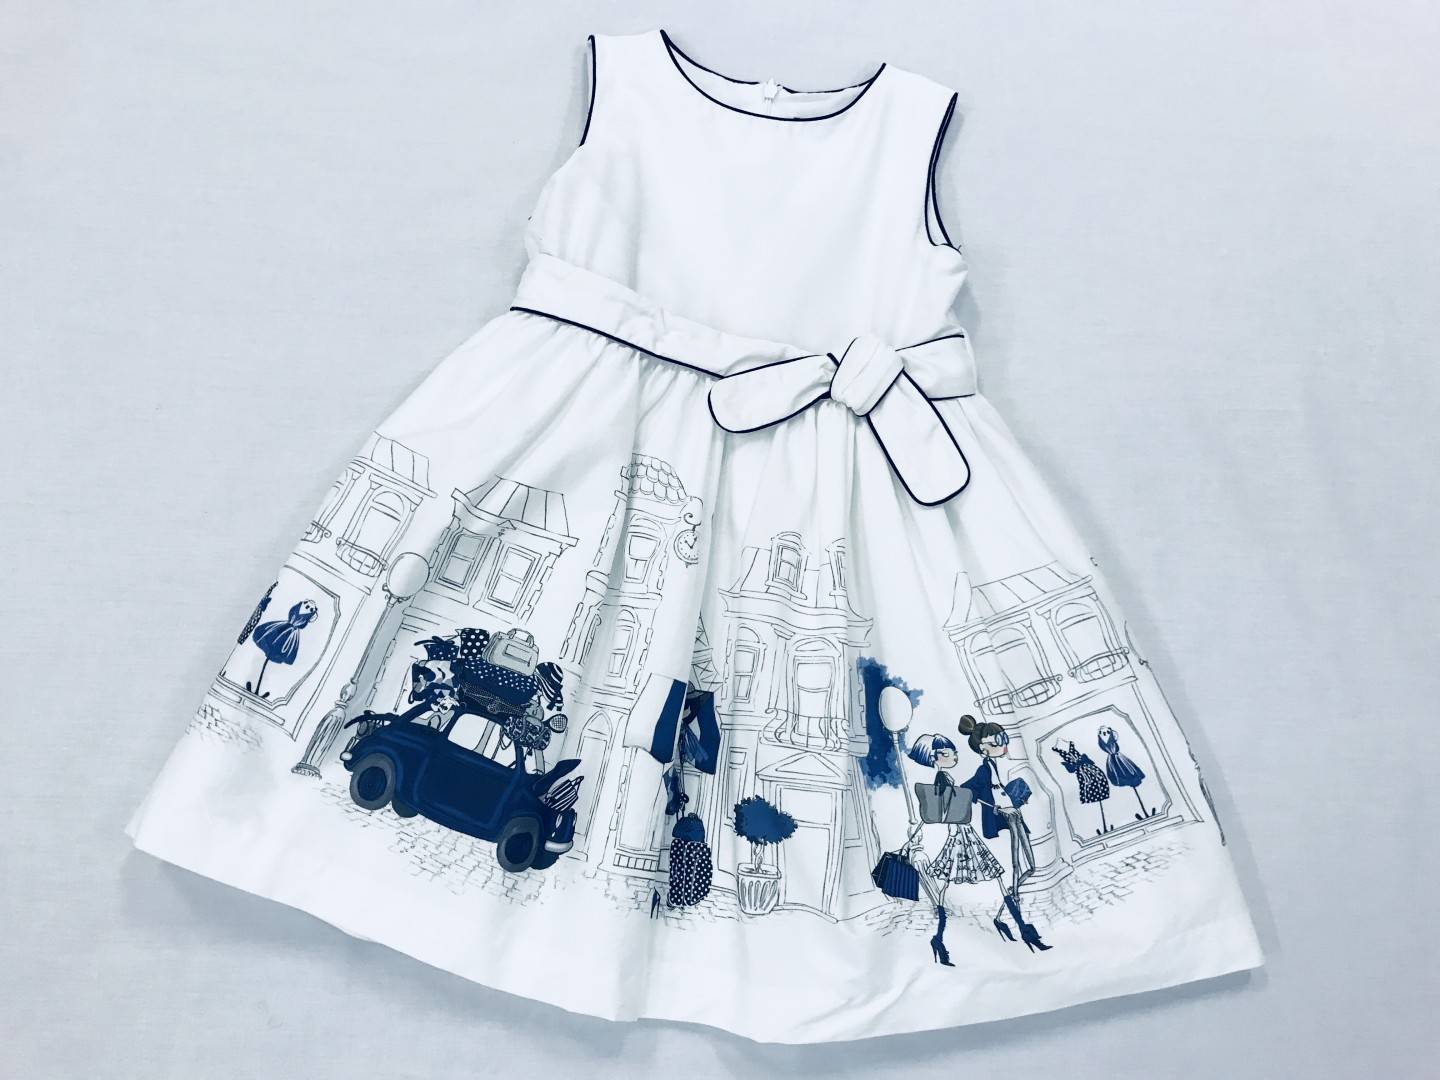 NAVY BLUE AND WHITE DRESS SIZE 5-7